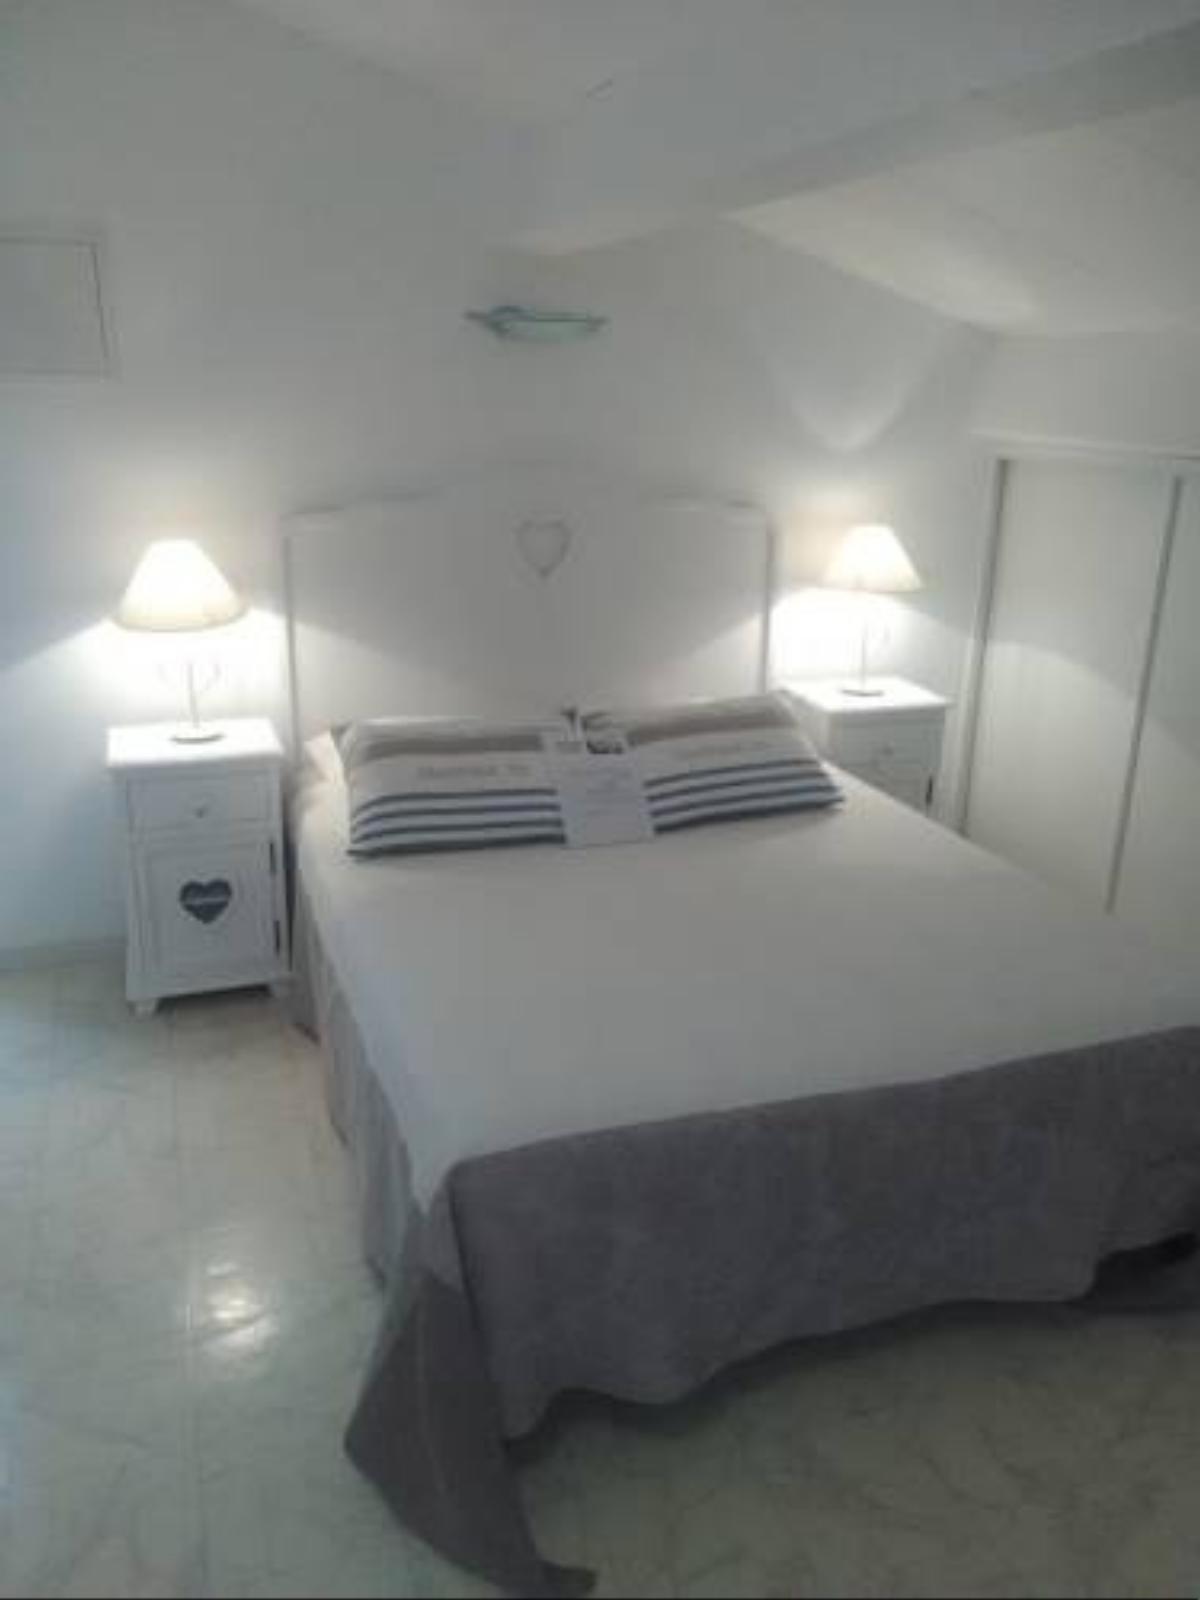 Chambres Calliope Hotel Biscarrosse France